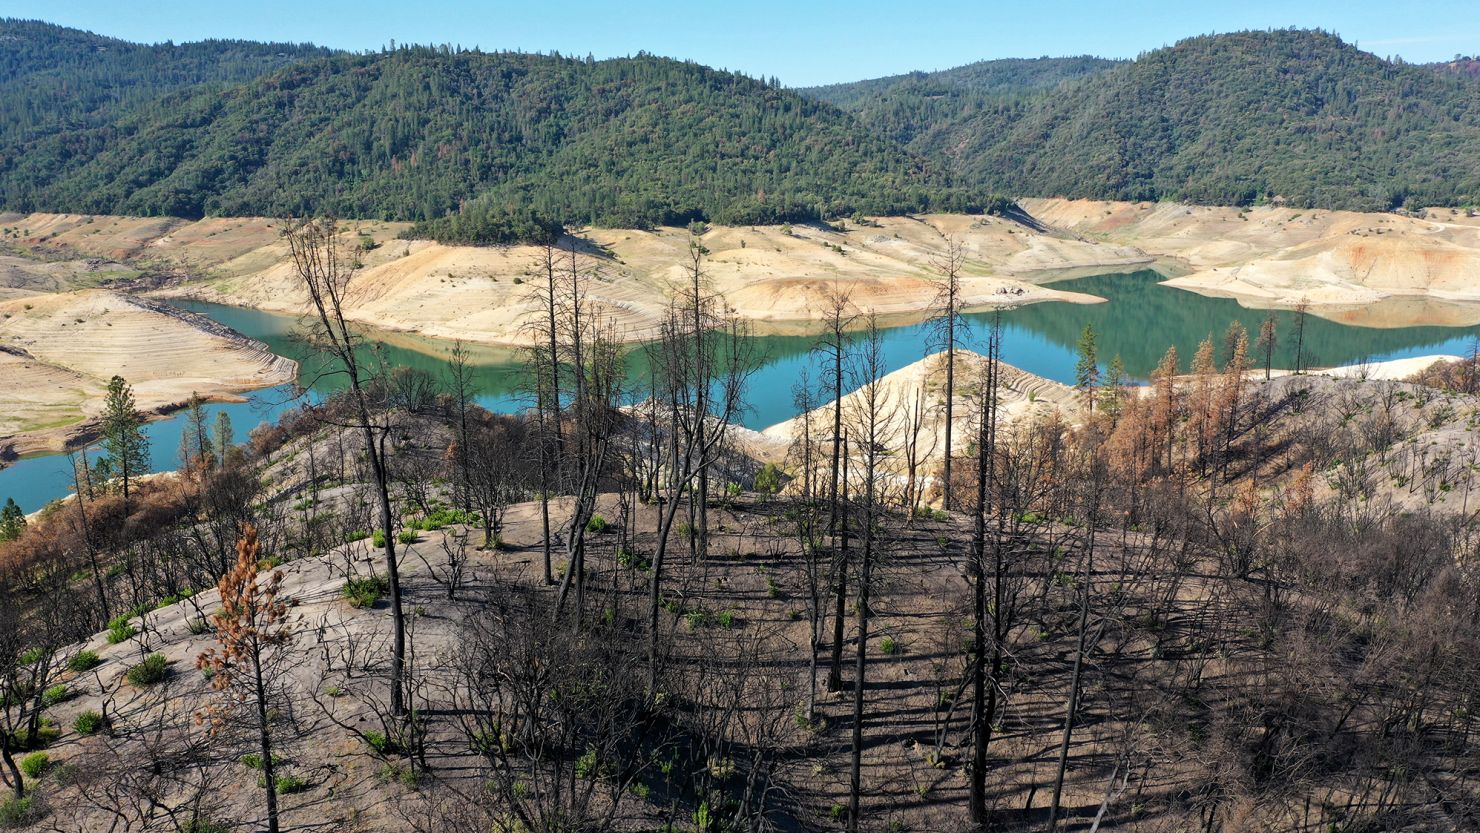 Trees burned by a recent wildfire line the steep banks of Lake Oroville on June 1, 2021 in California. As severe drought takes hold across the Western US, the risk of water shortages and dangerous wildfires is growing.